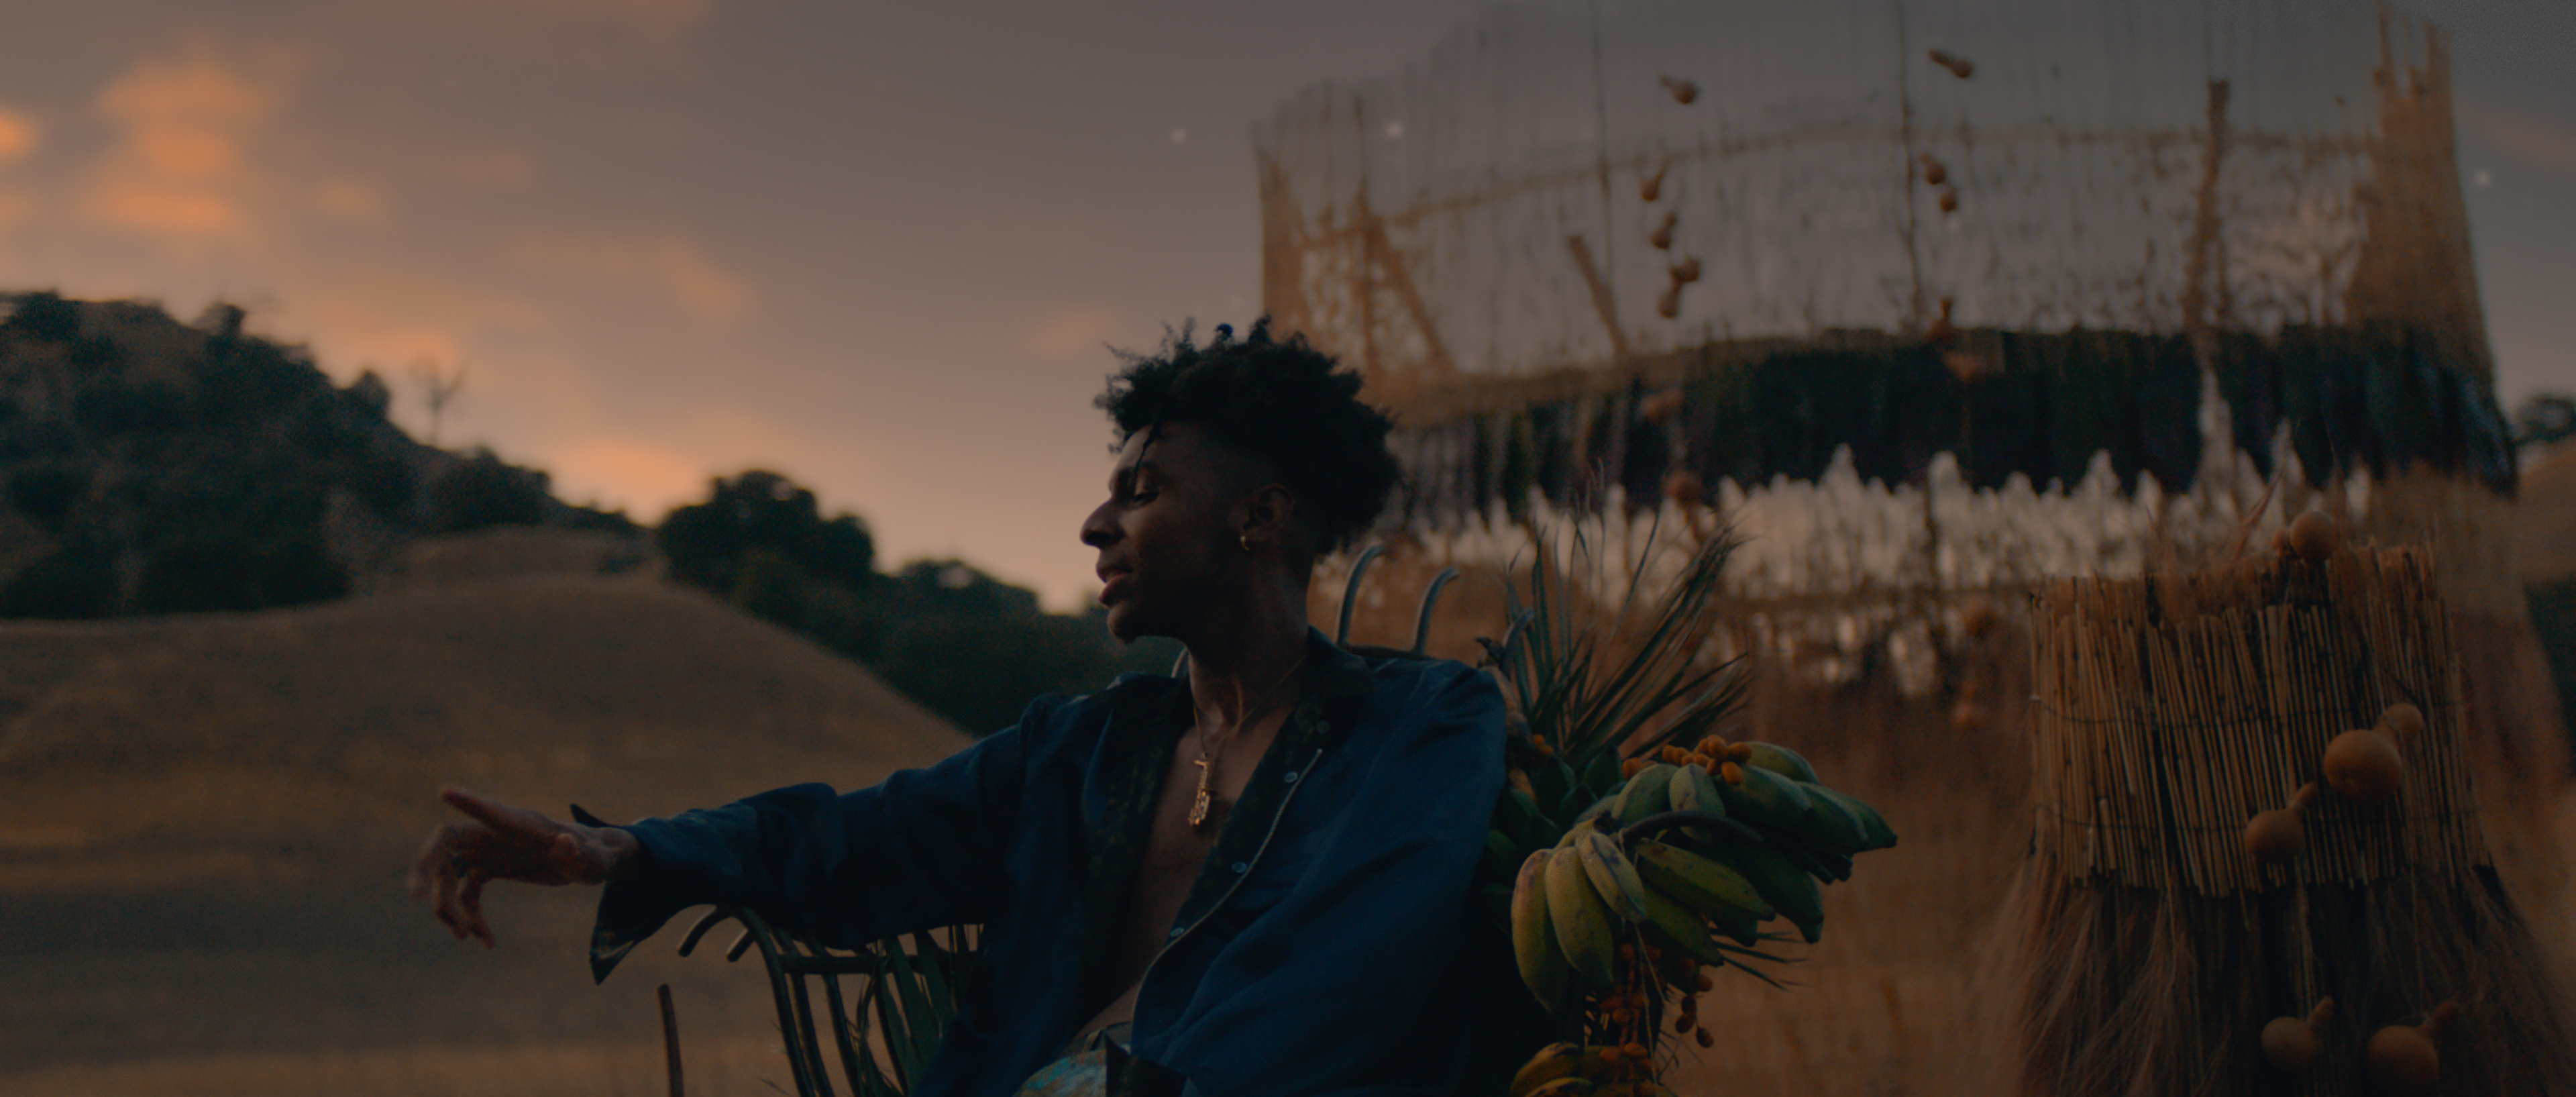 Daily Dose: Masego, Queen Tings (ft. Tiffany Gouche) - Paste Magazine